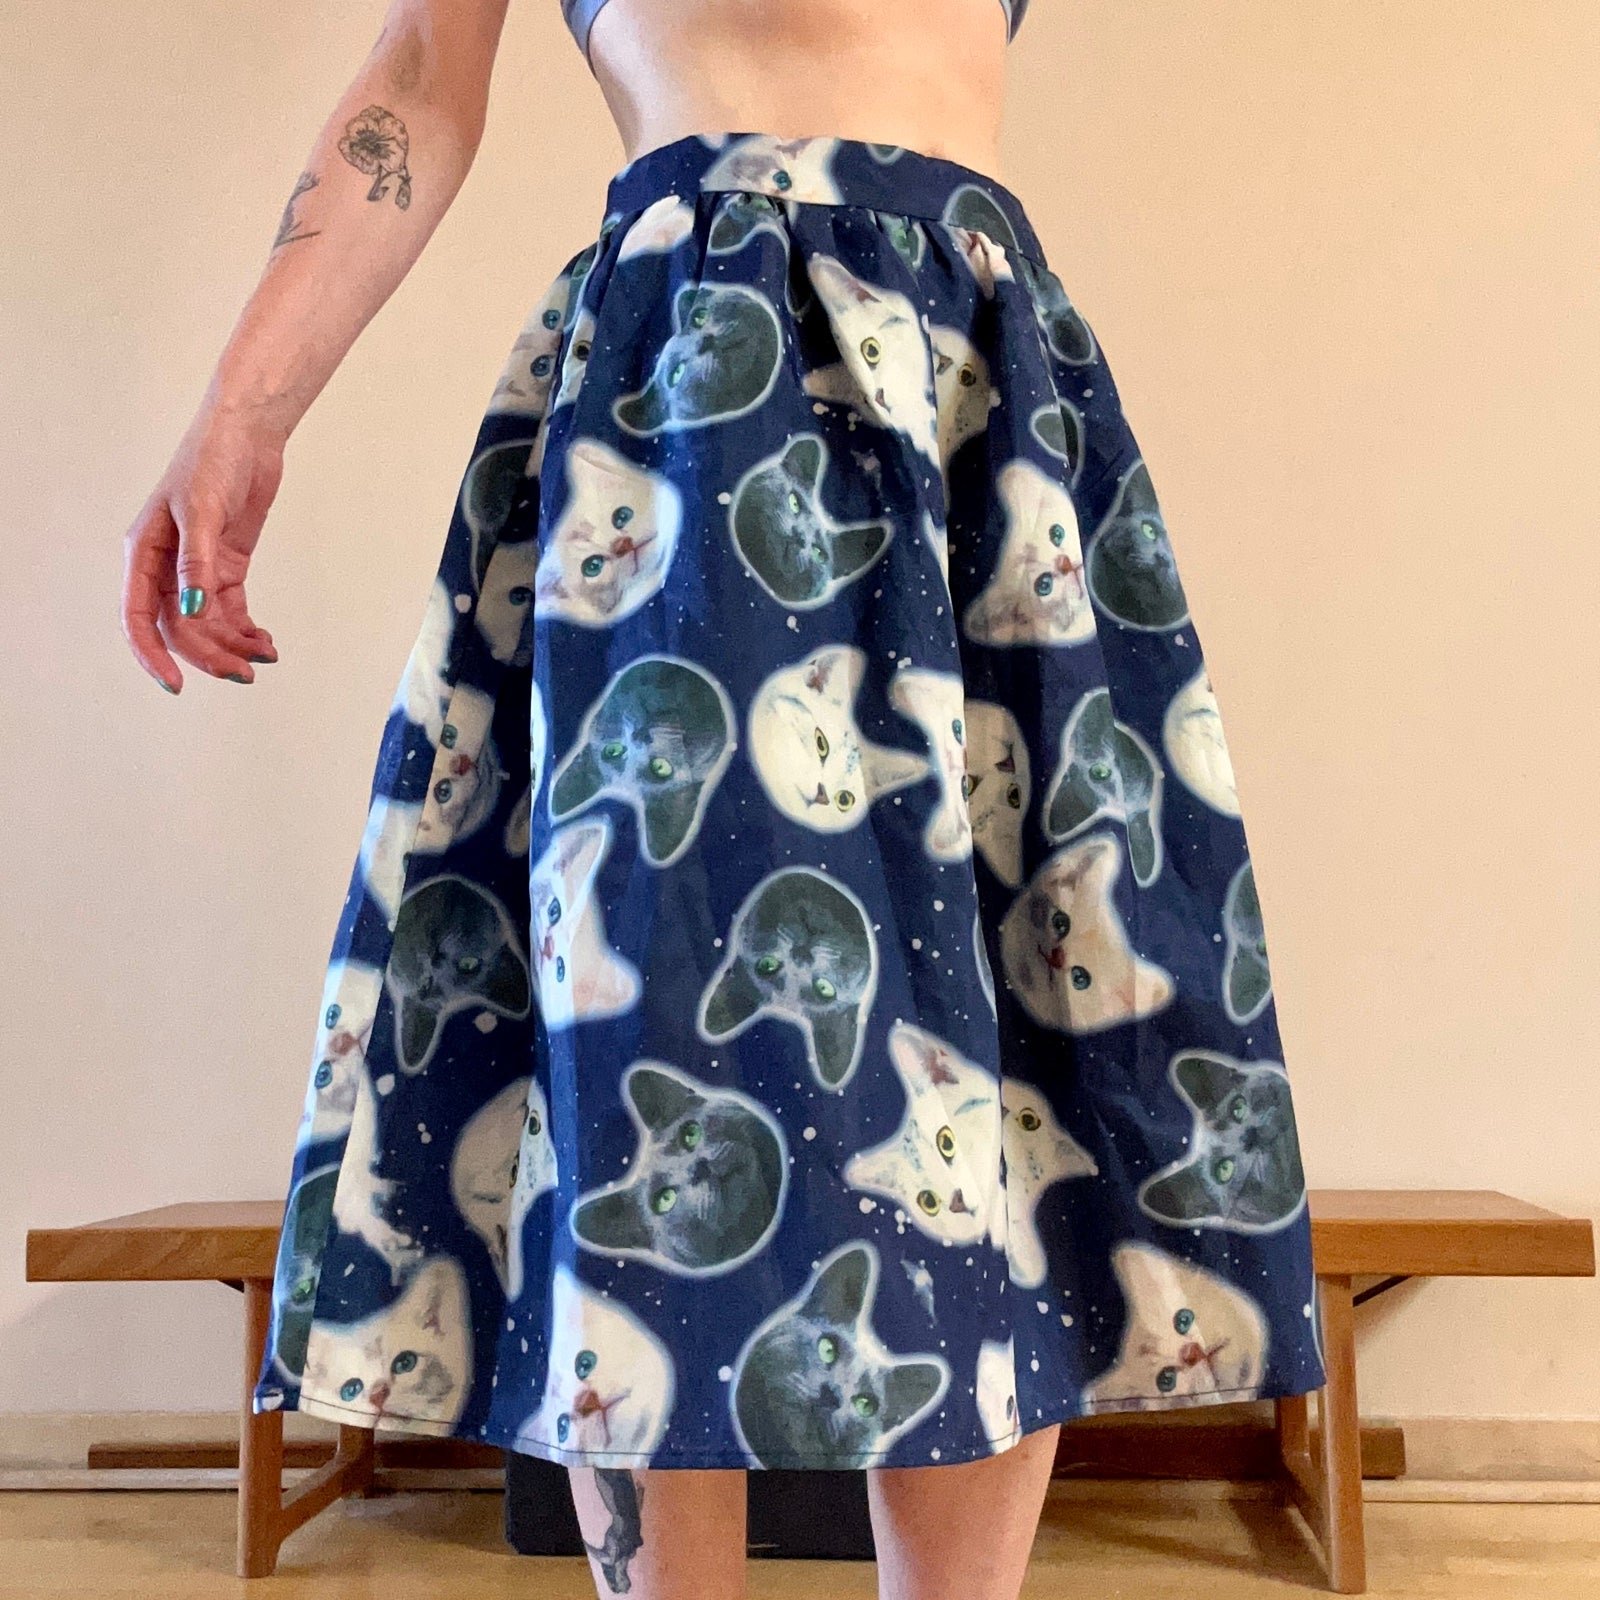 Discounted ModCloth Cat Skirt NWOT OECz3twQG best sale